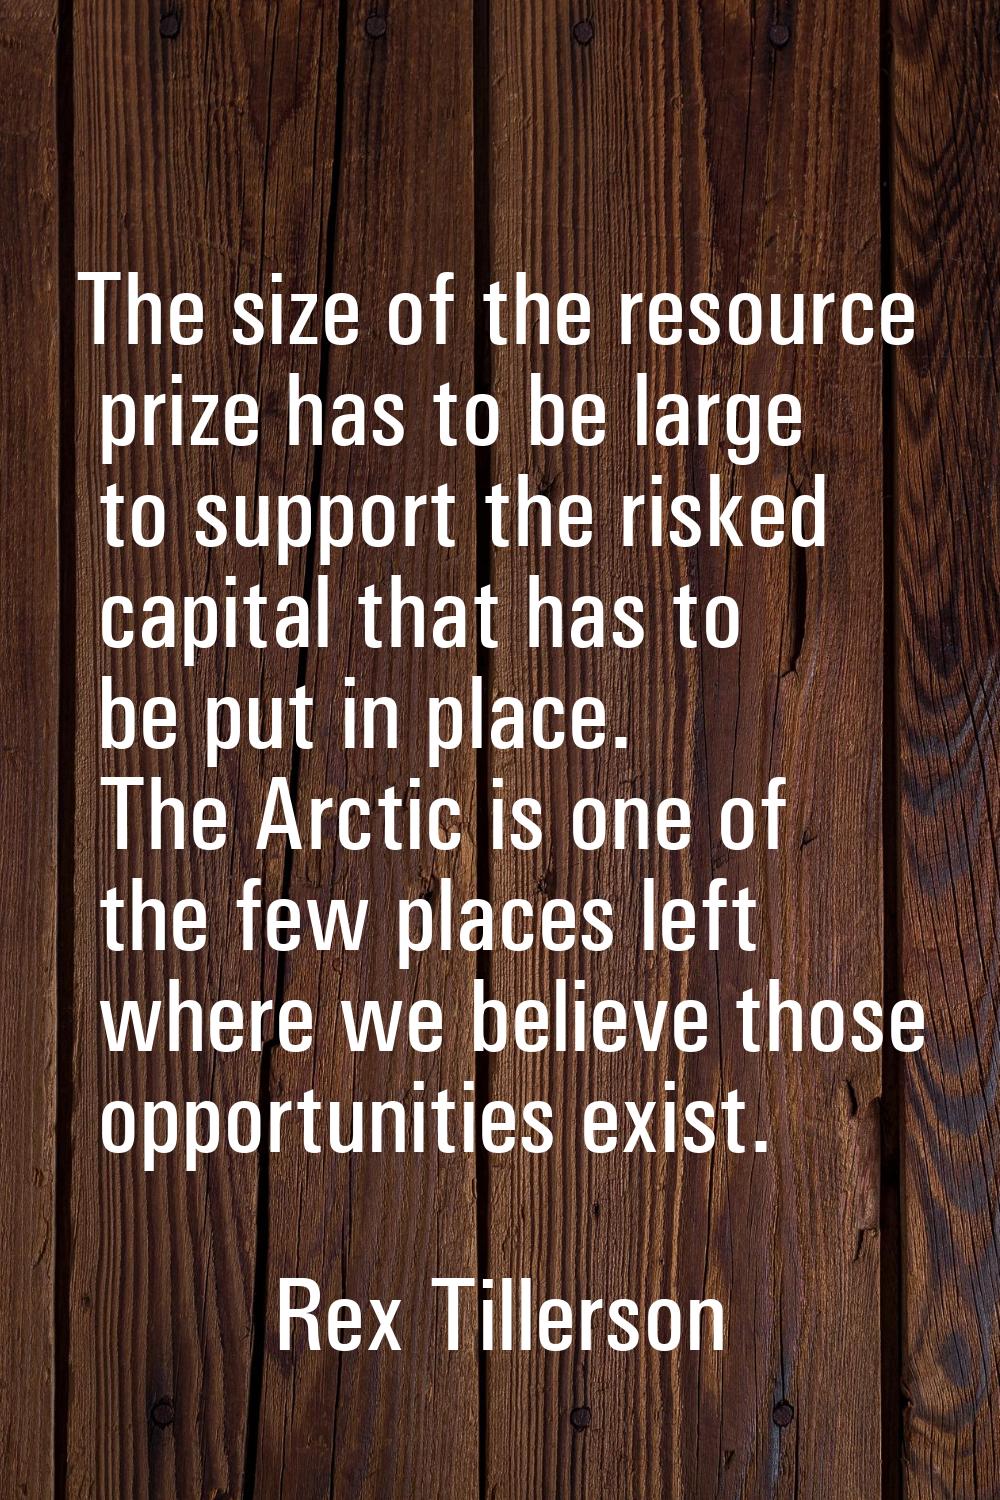 The size of the resource prize has to be large to support the risked capital that has to be put in 